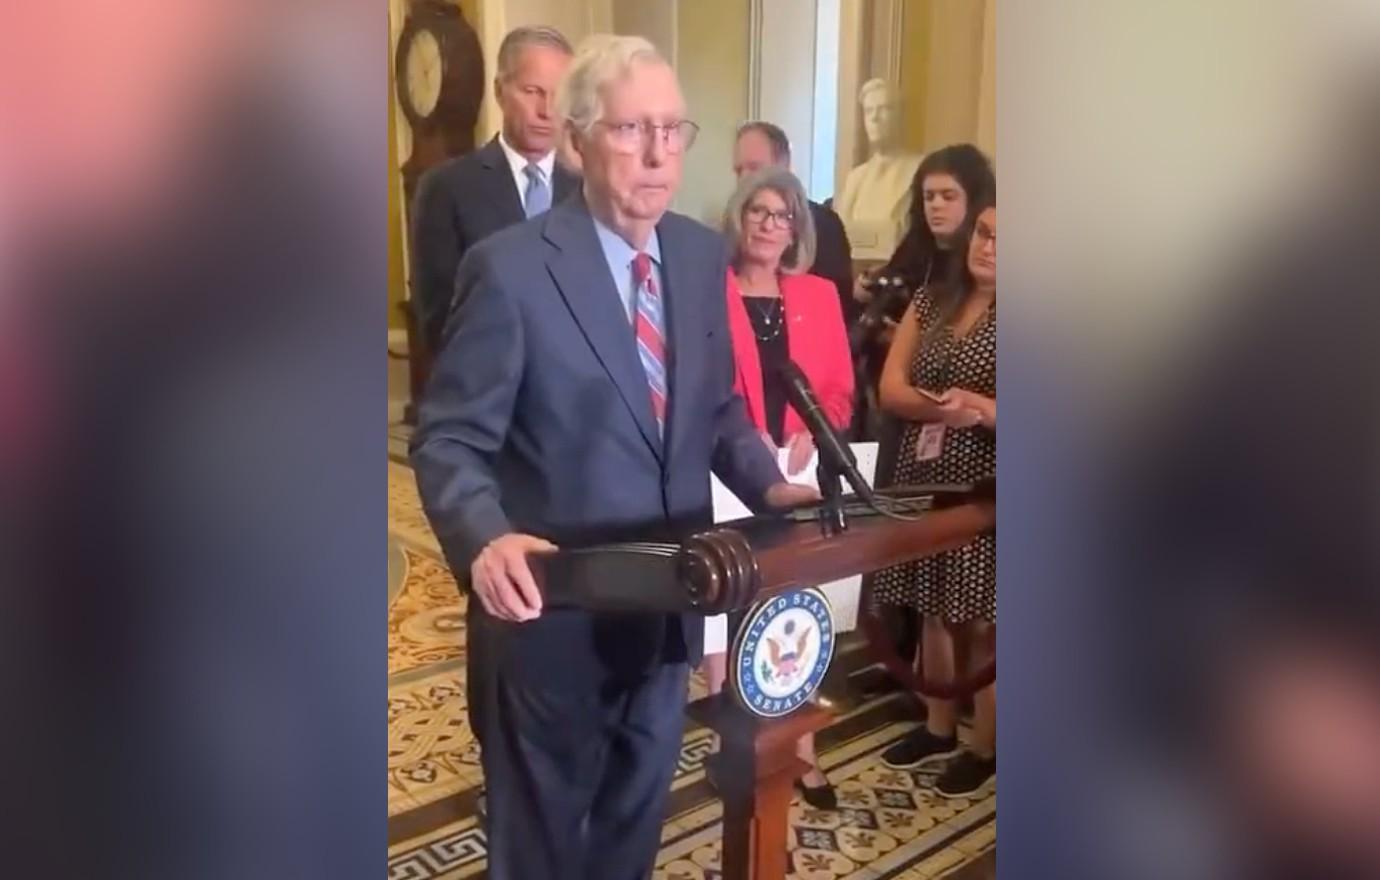 Watch Video Mitch McConnell, 81, Escorted From Podium After Appearing Disoriented